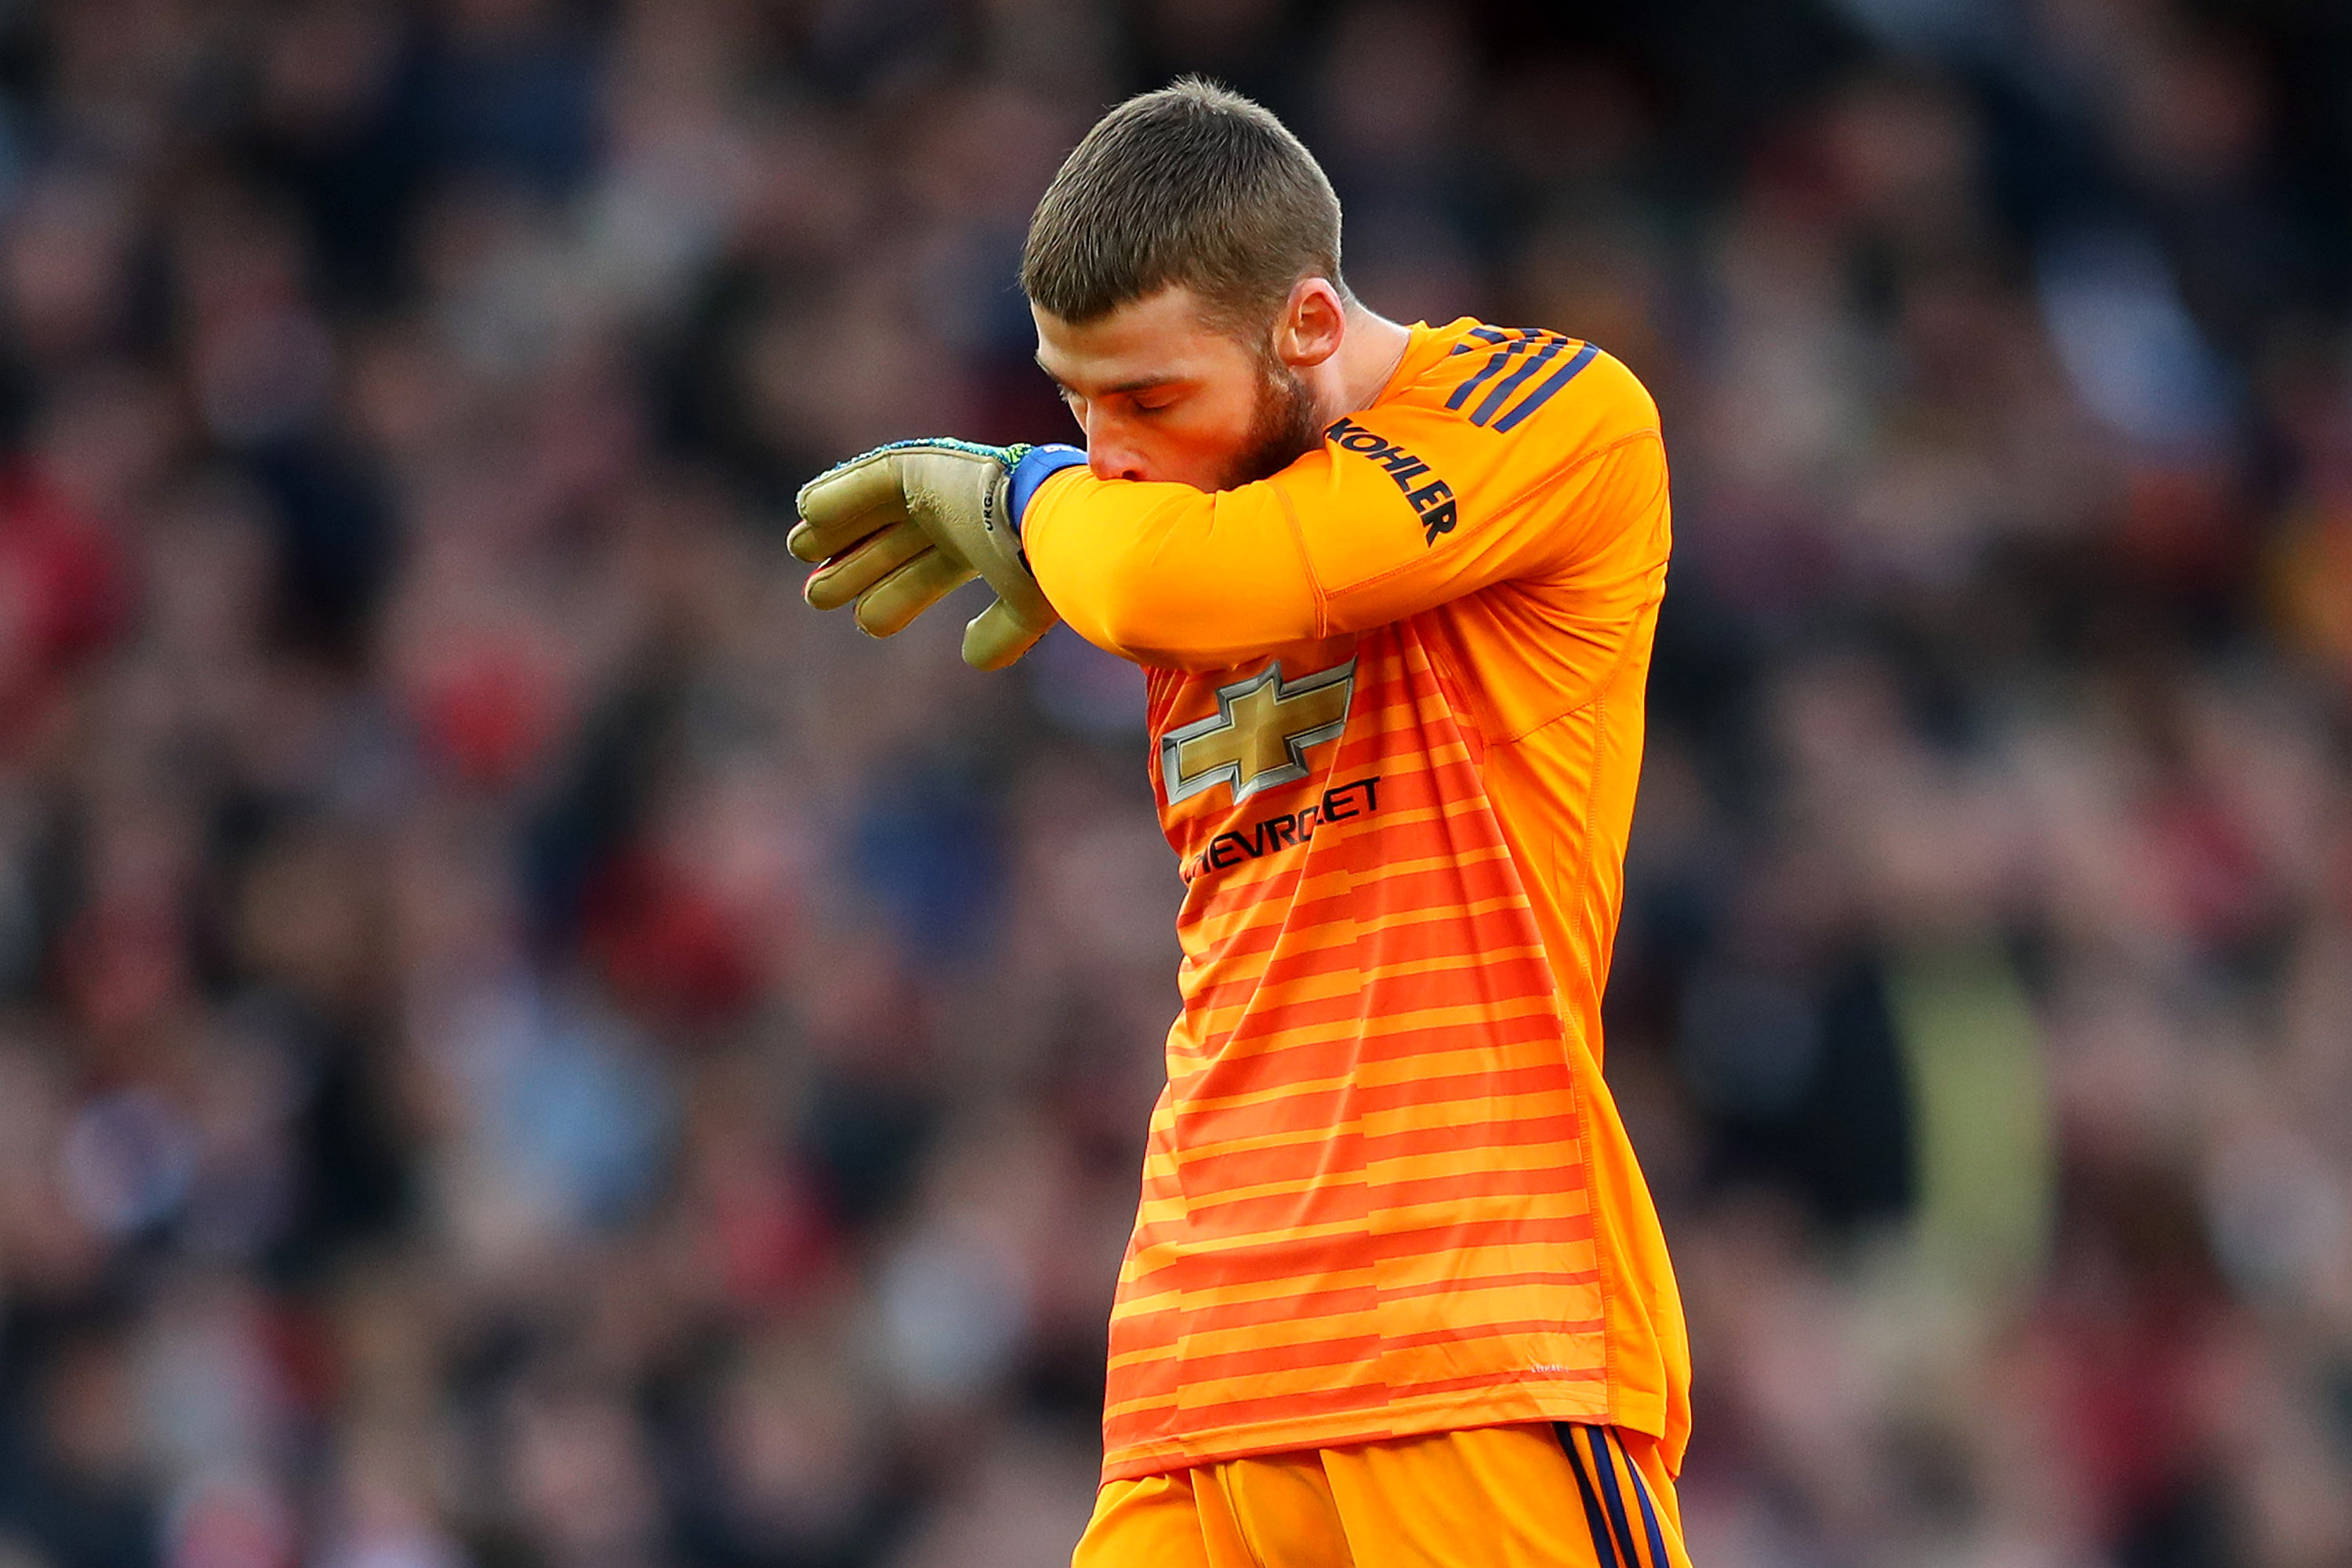 LONDON, ENGLAND - MARCH 10: David De Gea of Manchester United looks dejected during the Premier League match between Arsenal FC and Manchester United at Emirates Stadium on March 10, 2019 in London, United Kingdom. (Photo by Catherine Ivill/Getty Images)